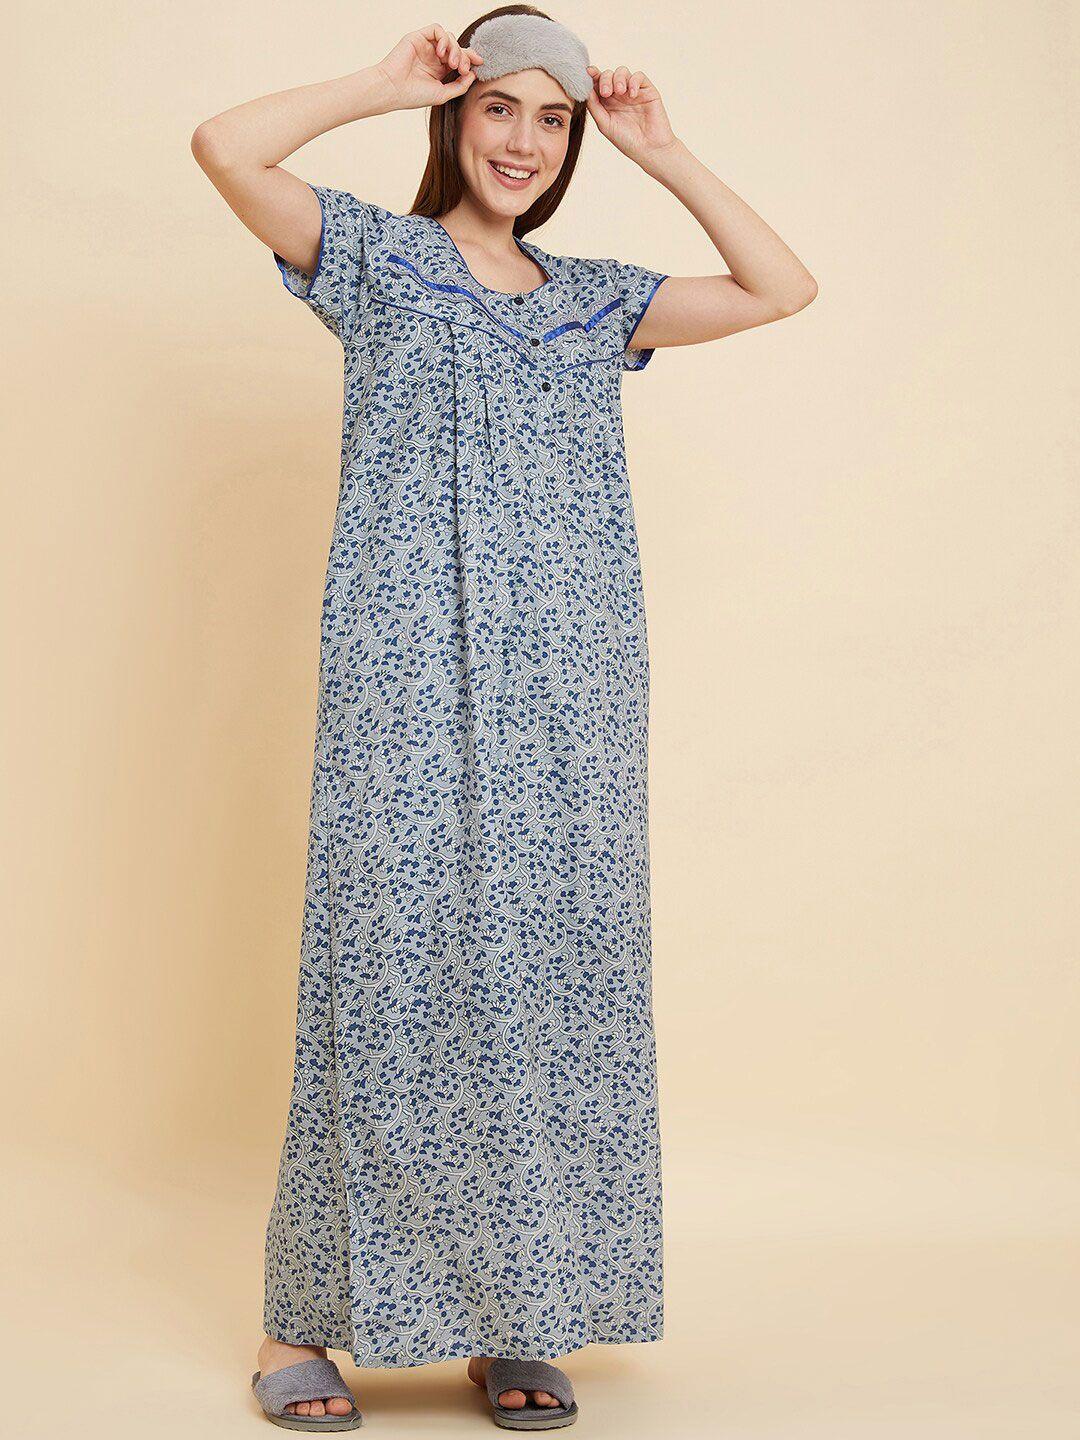 sweet dreams blue & white floral printed pure cotton maxi nightdress